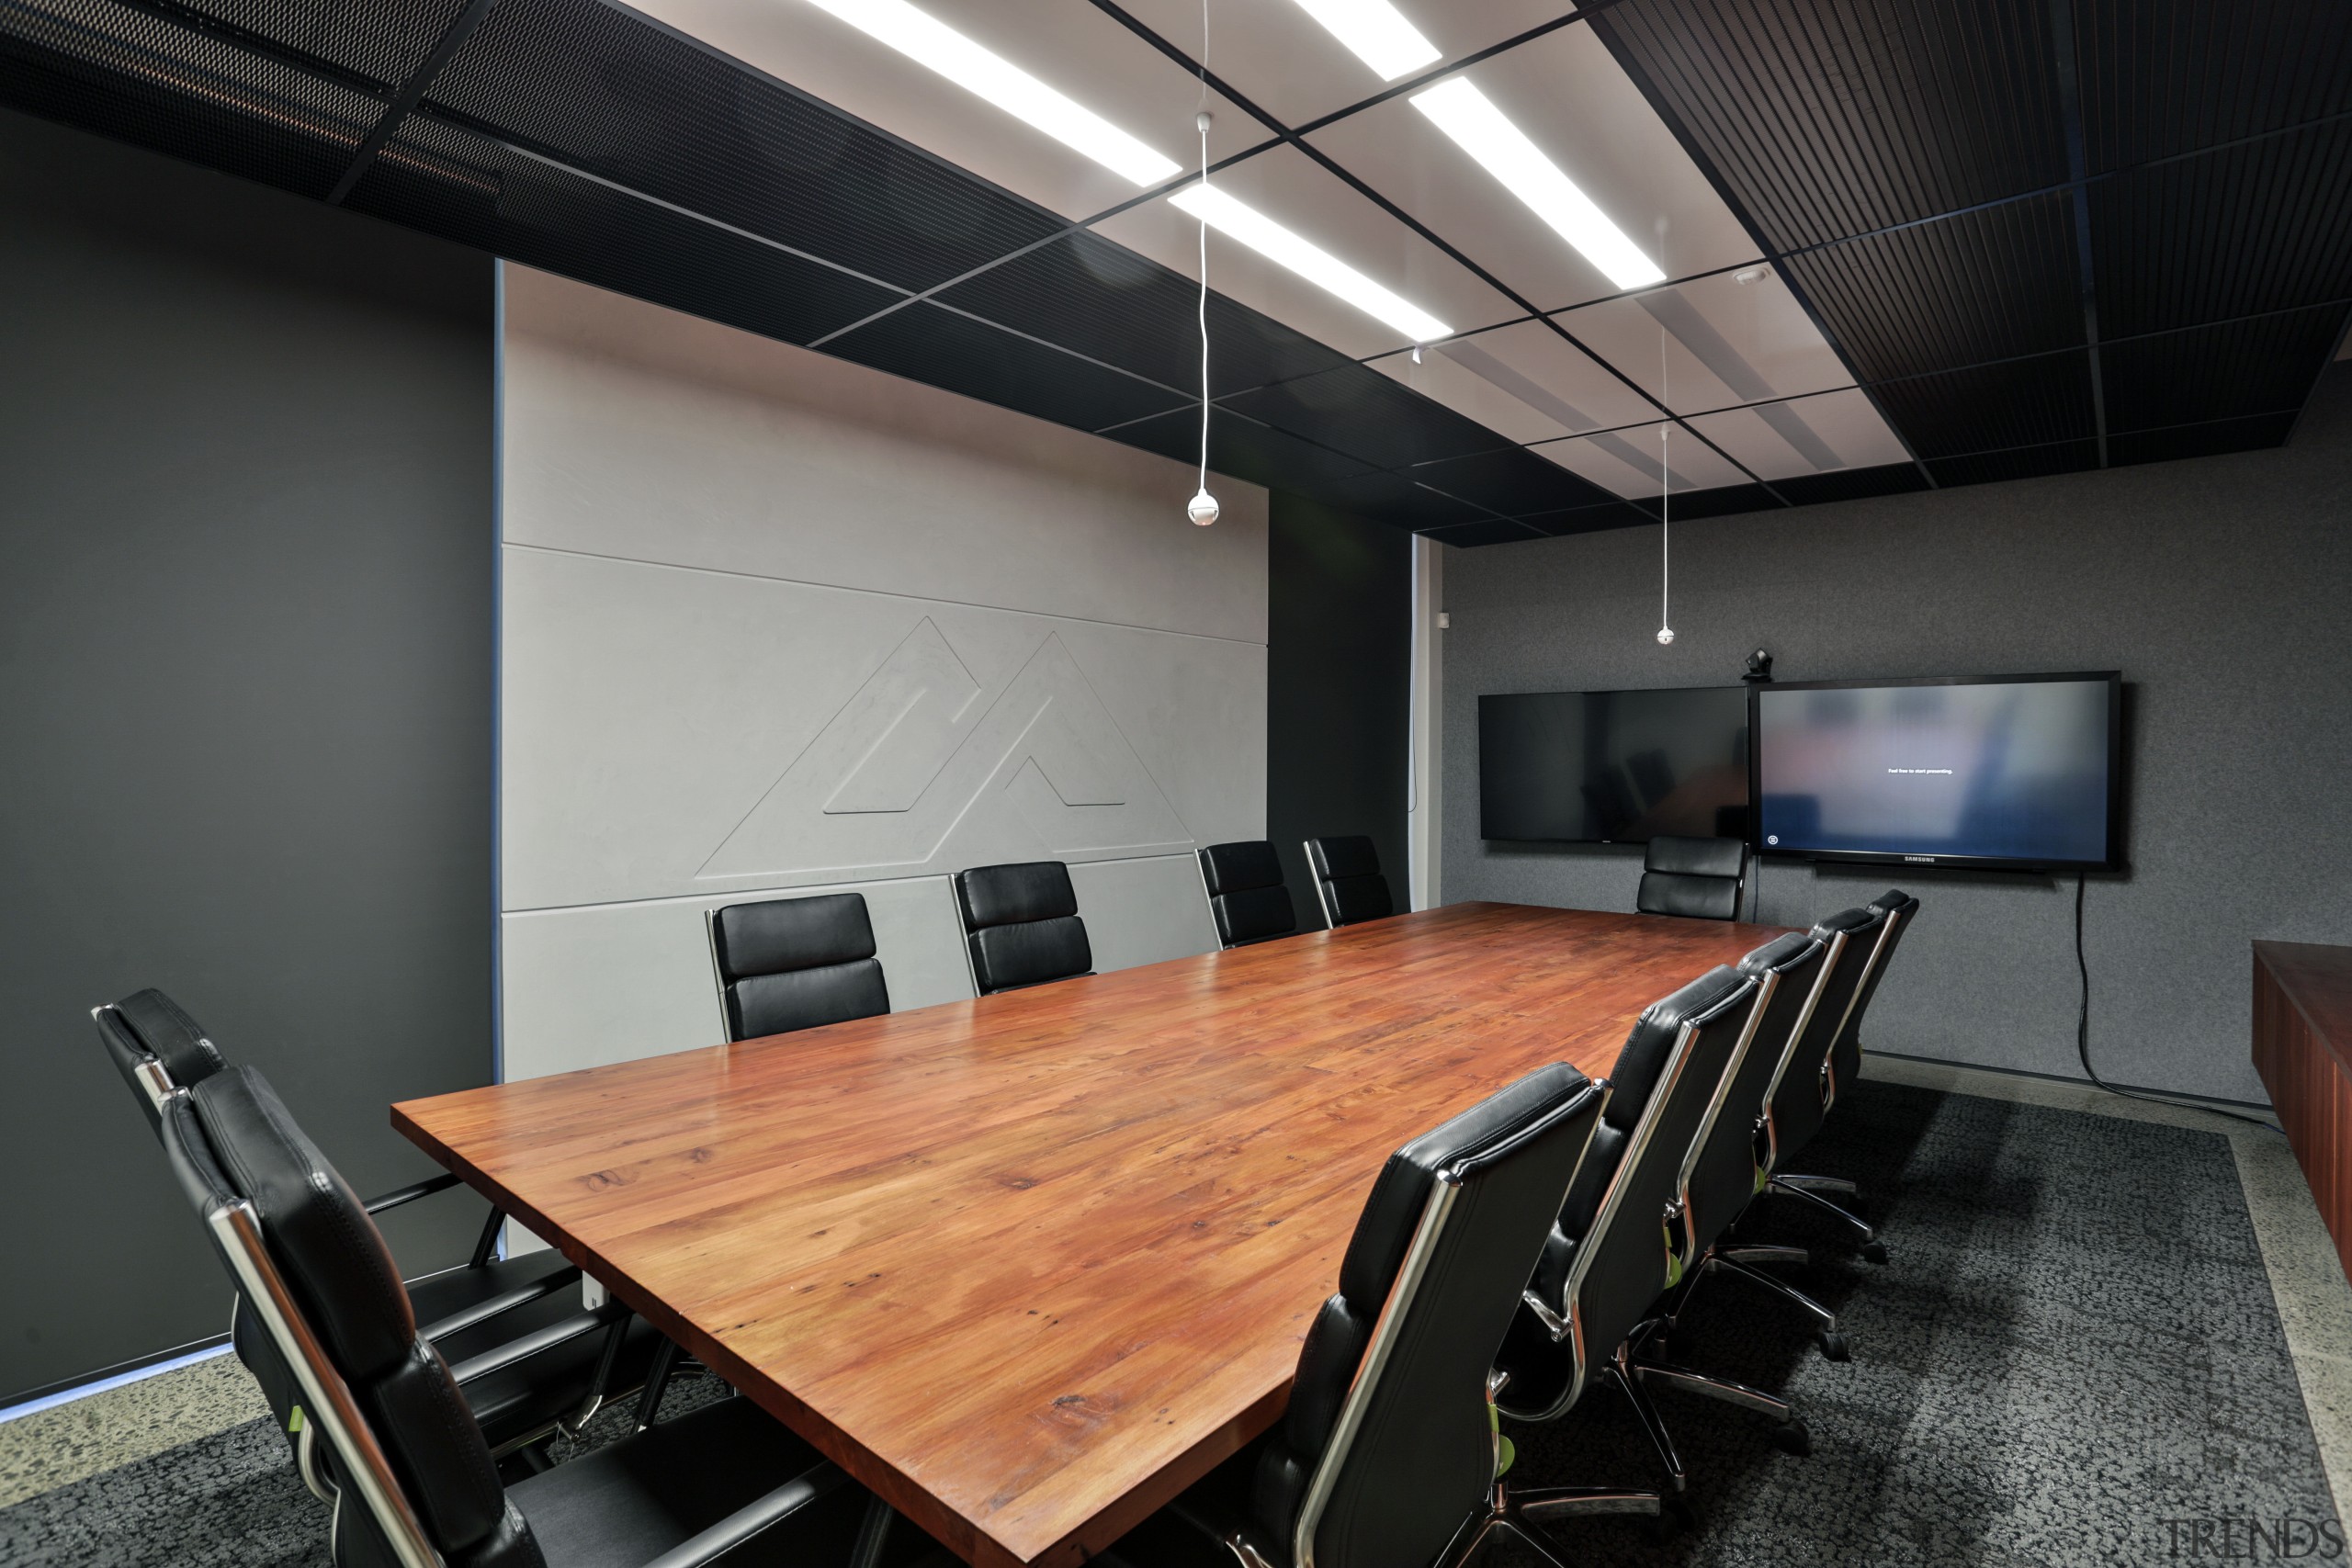 The boardroom table at the Kathmandu headquarters is auditorium, conference hall, interior design, office, table, black, gray